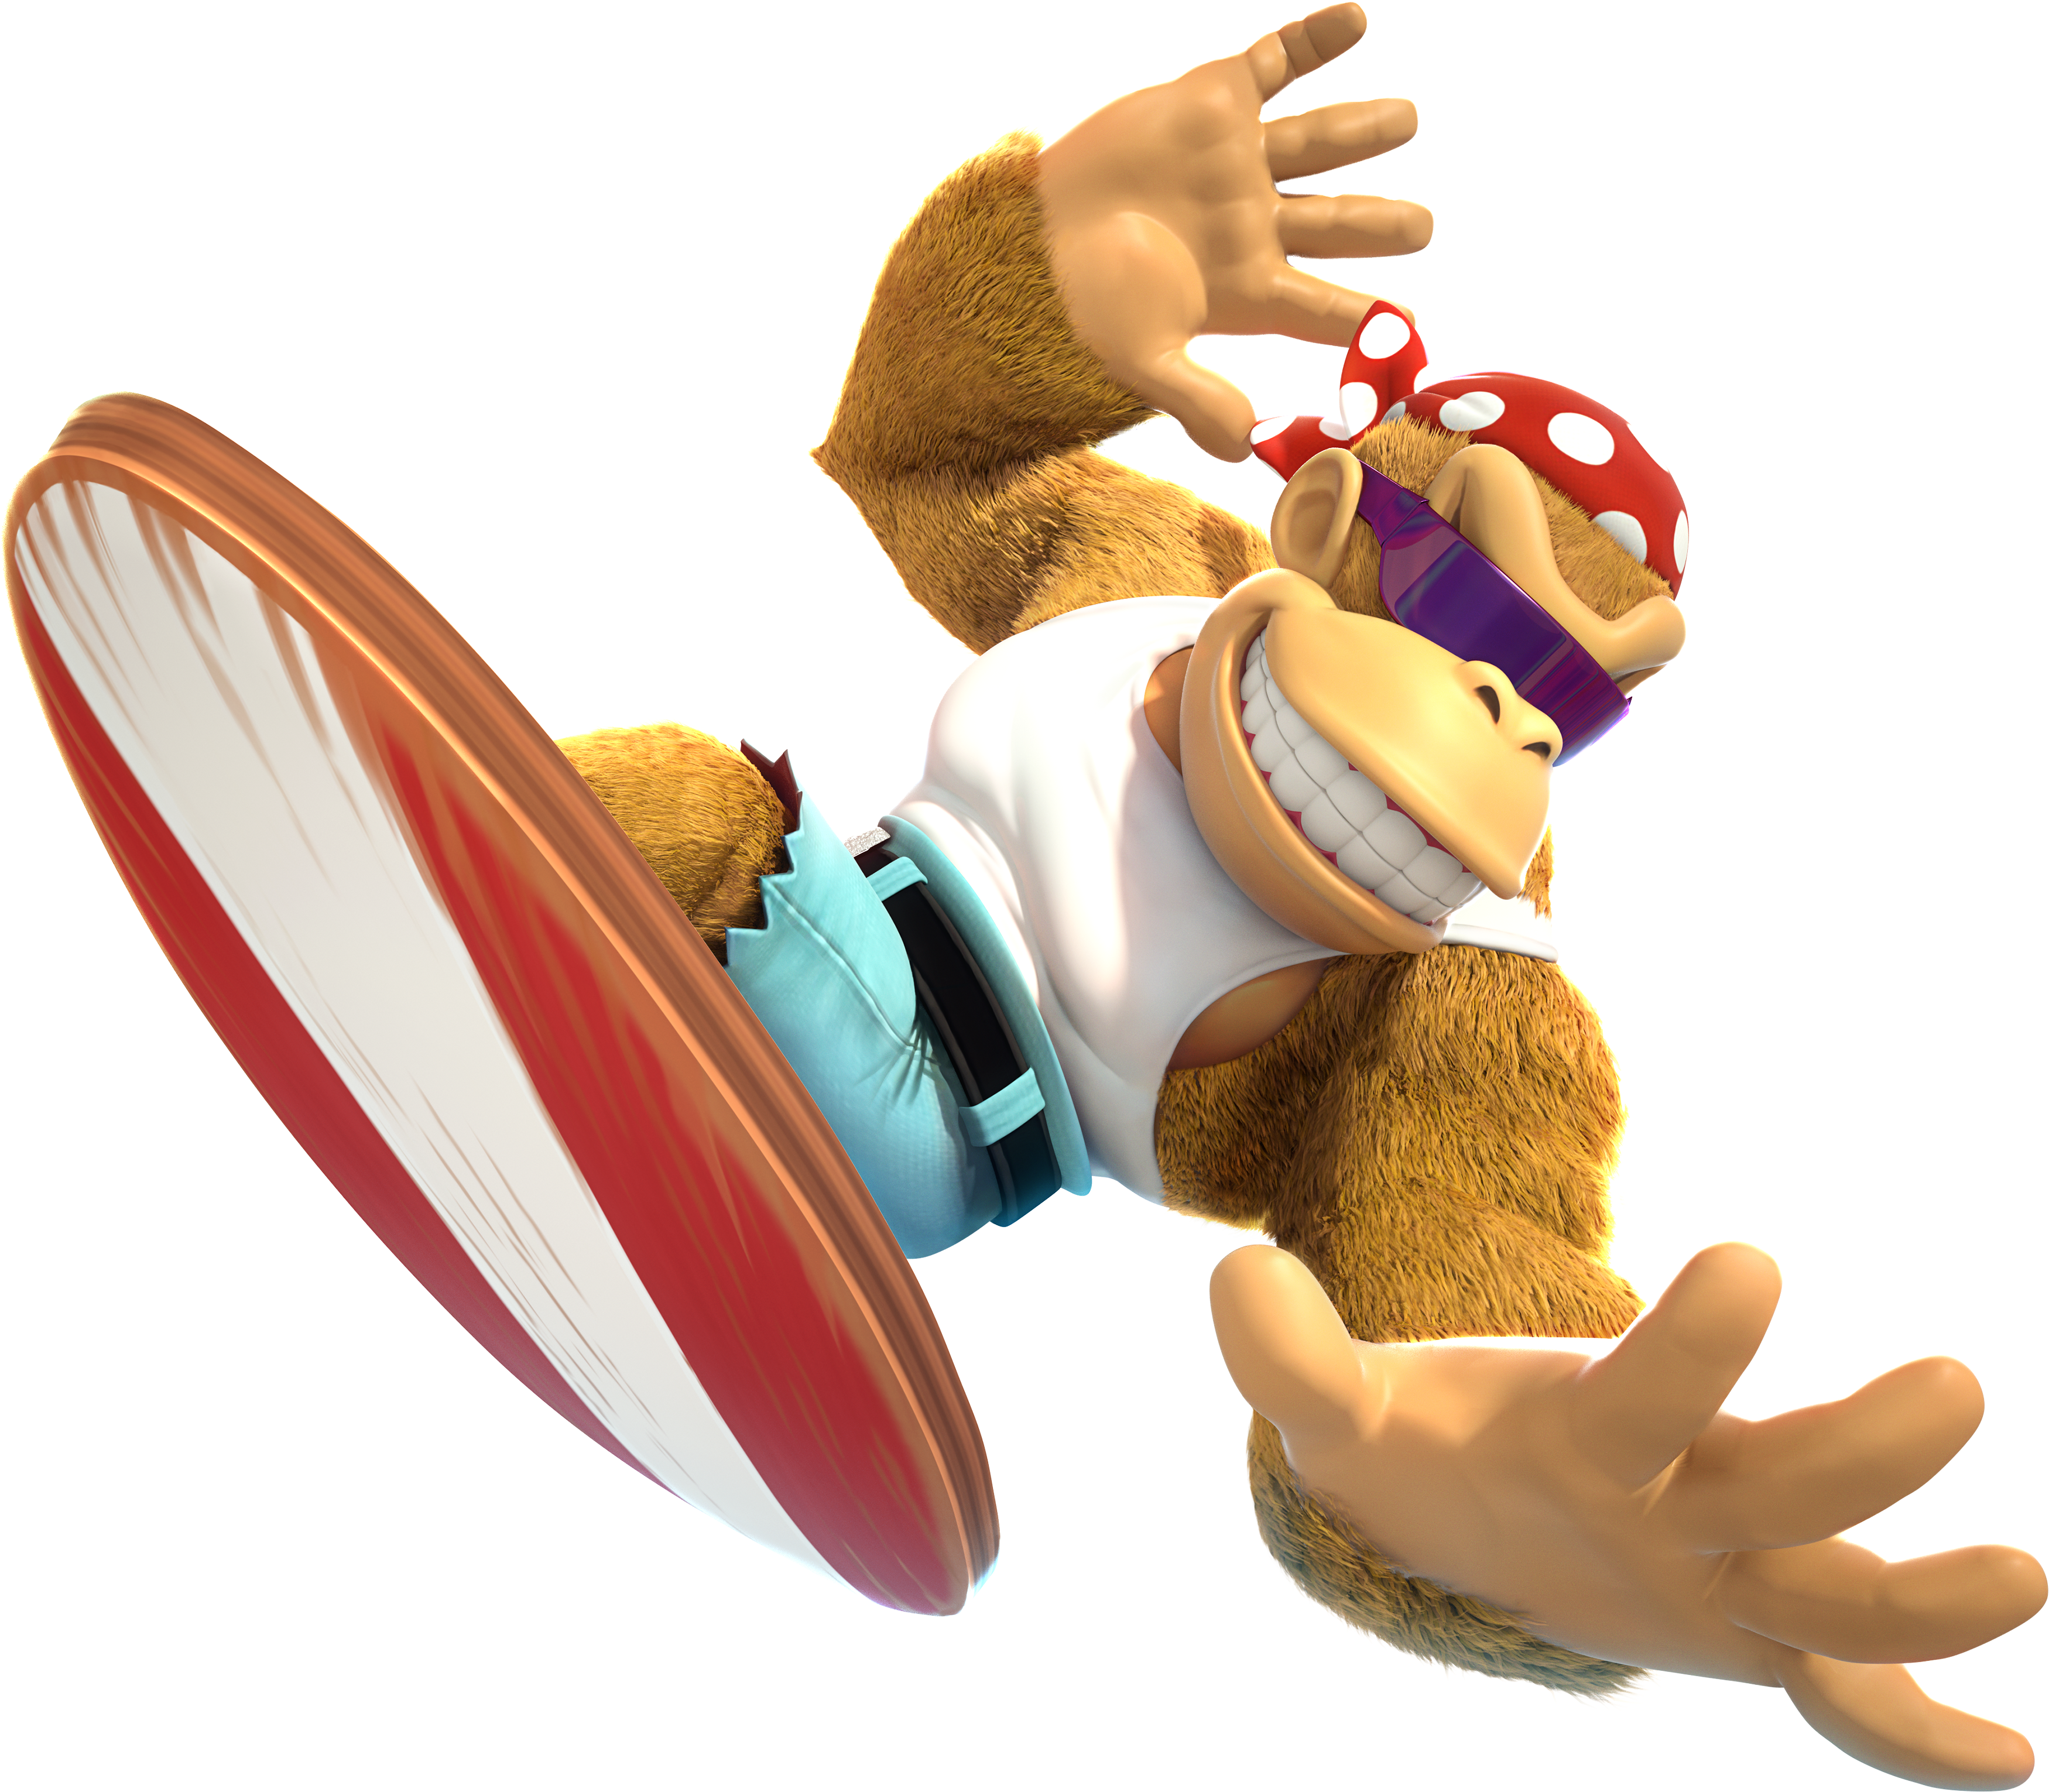 What is the deal with Funky Kong being used for every Mario Kart Wii speed  run? - Quora